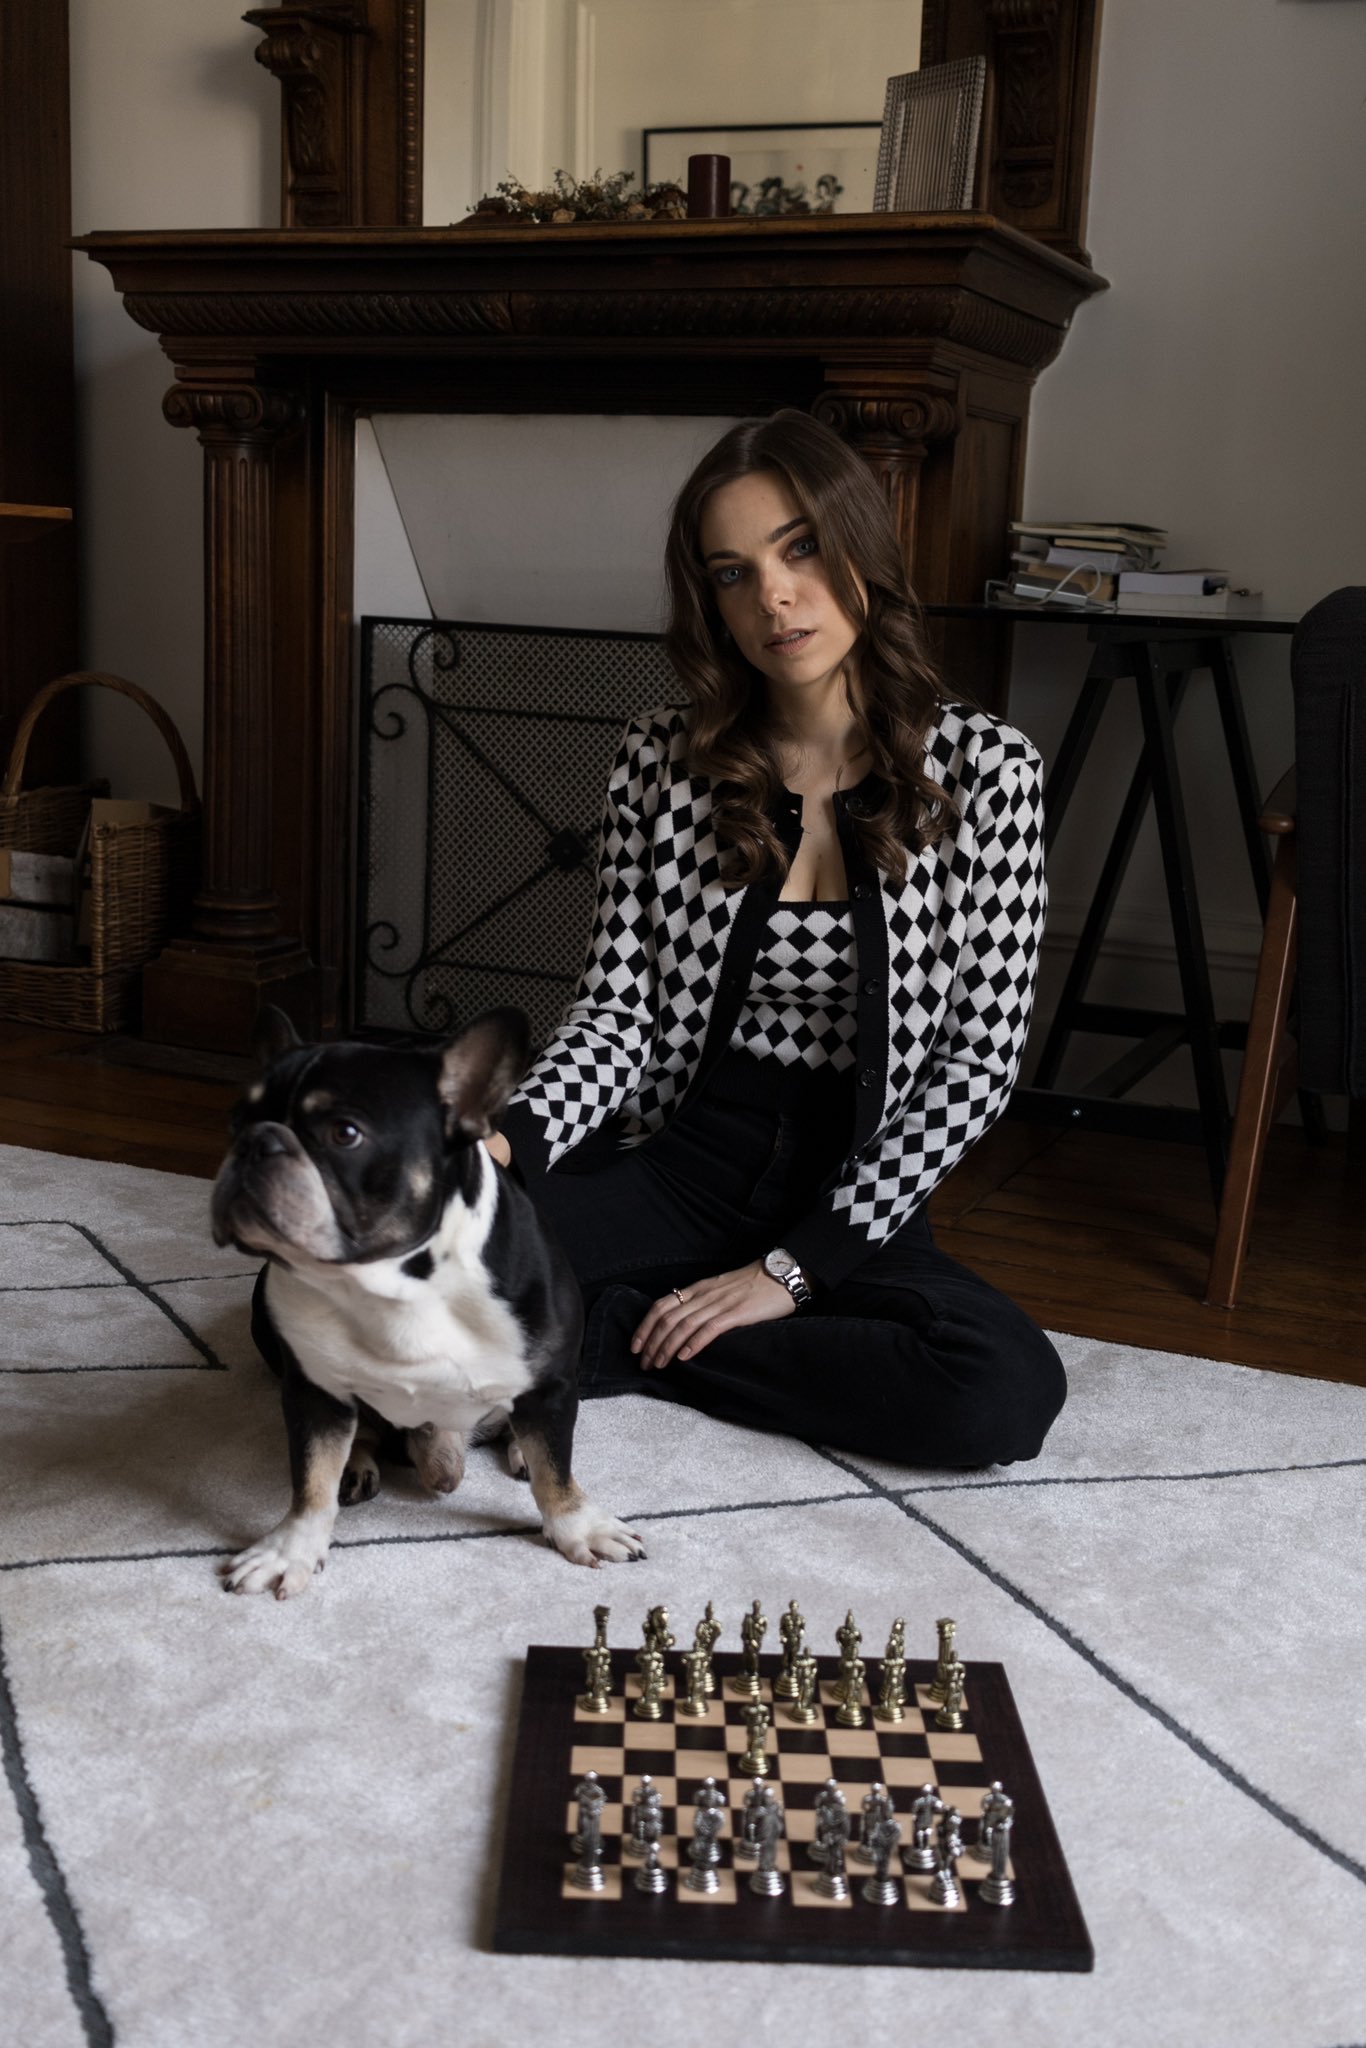 Dina Belenkaya on X: Wondering what a chess escape room be like